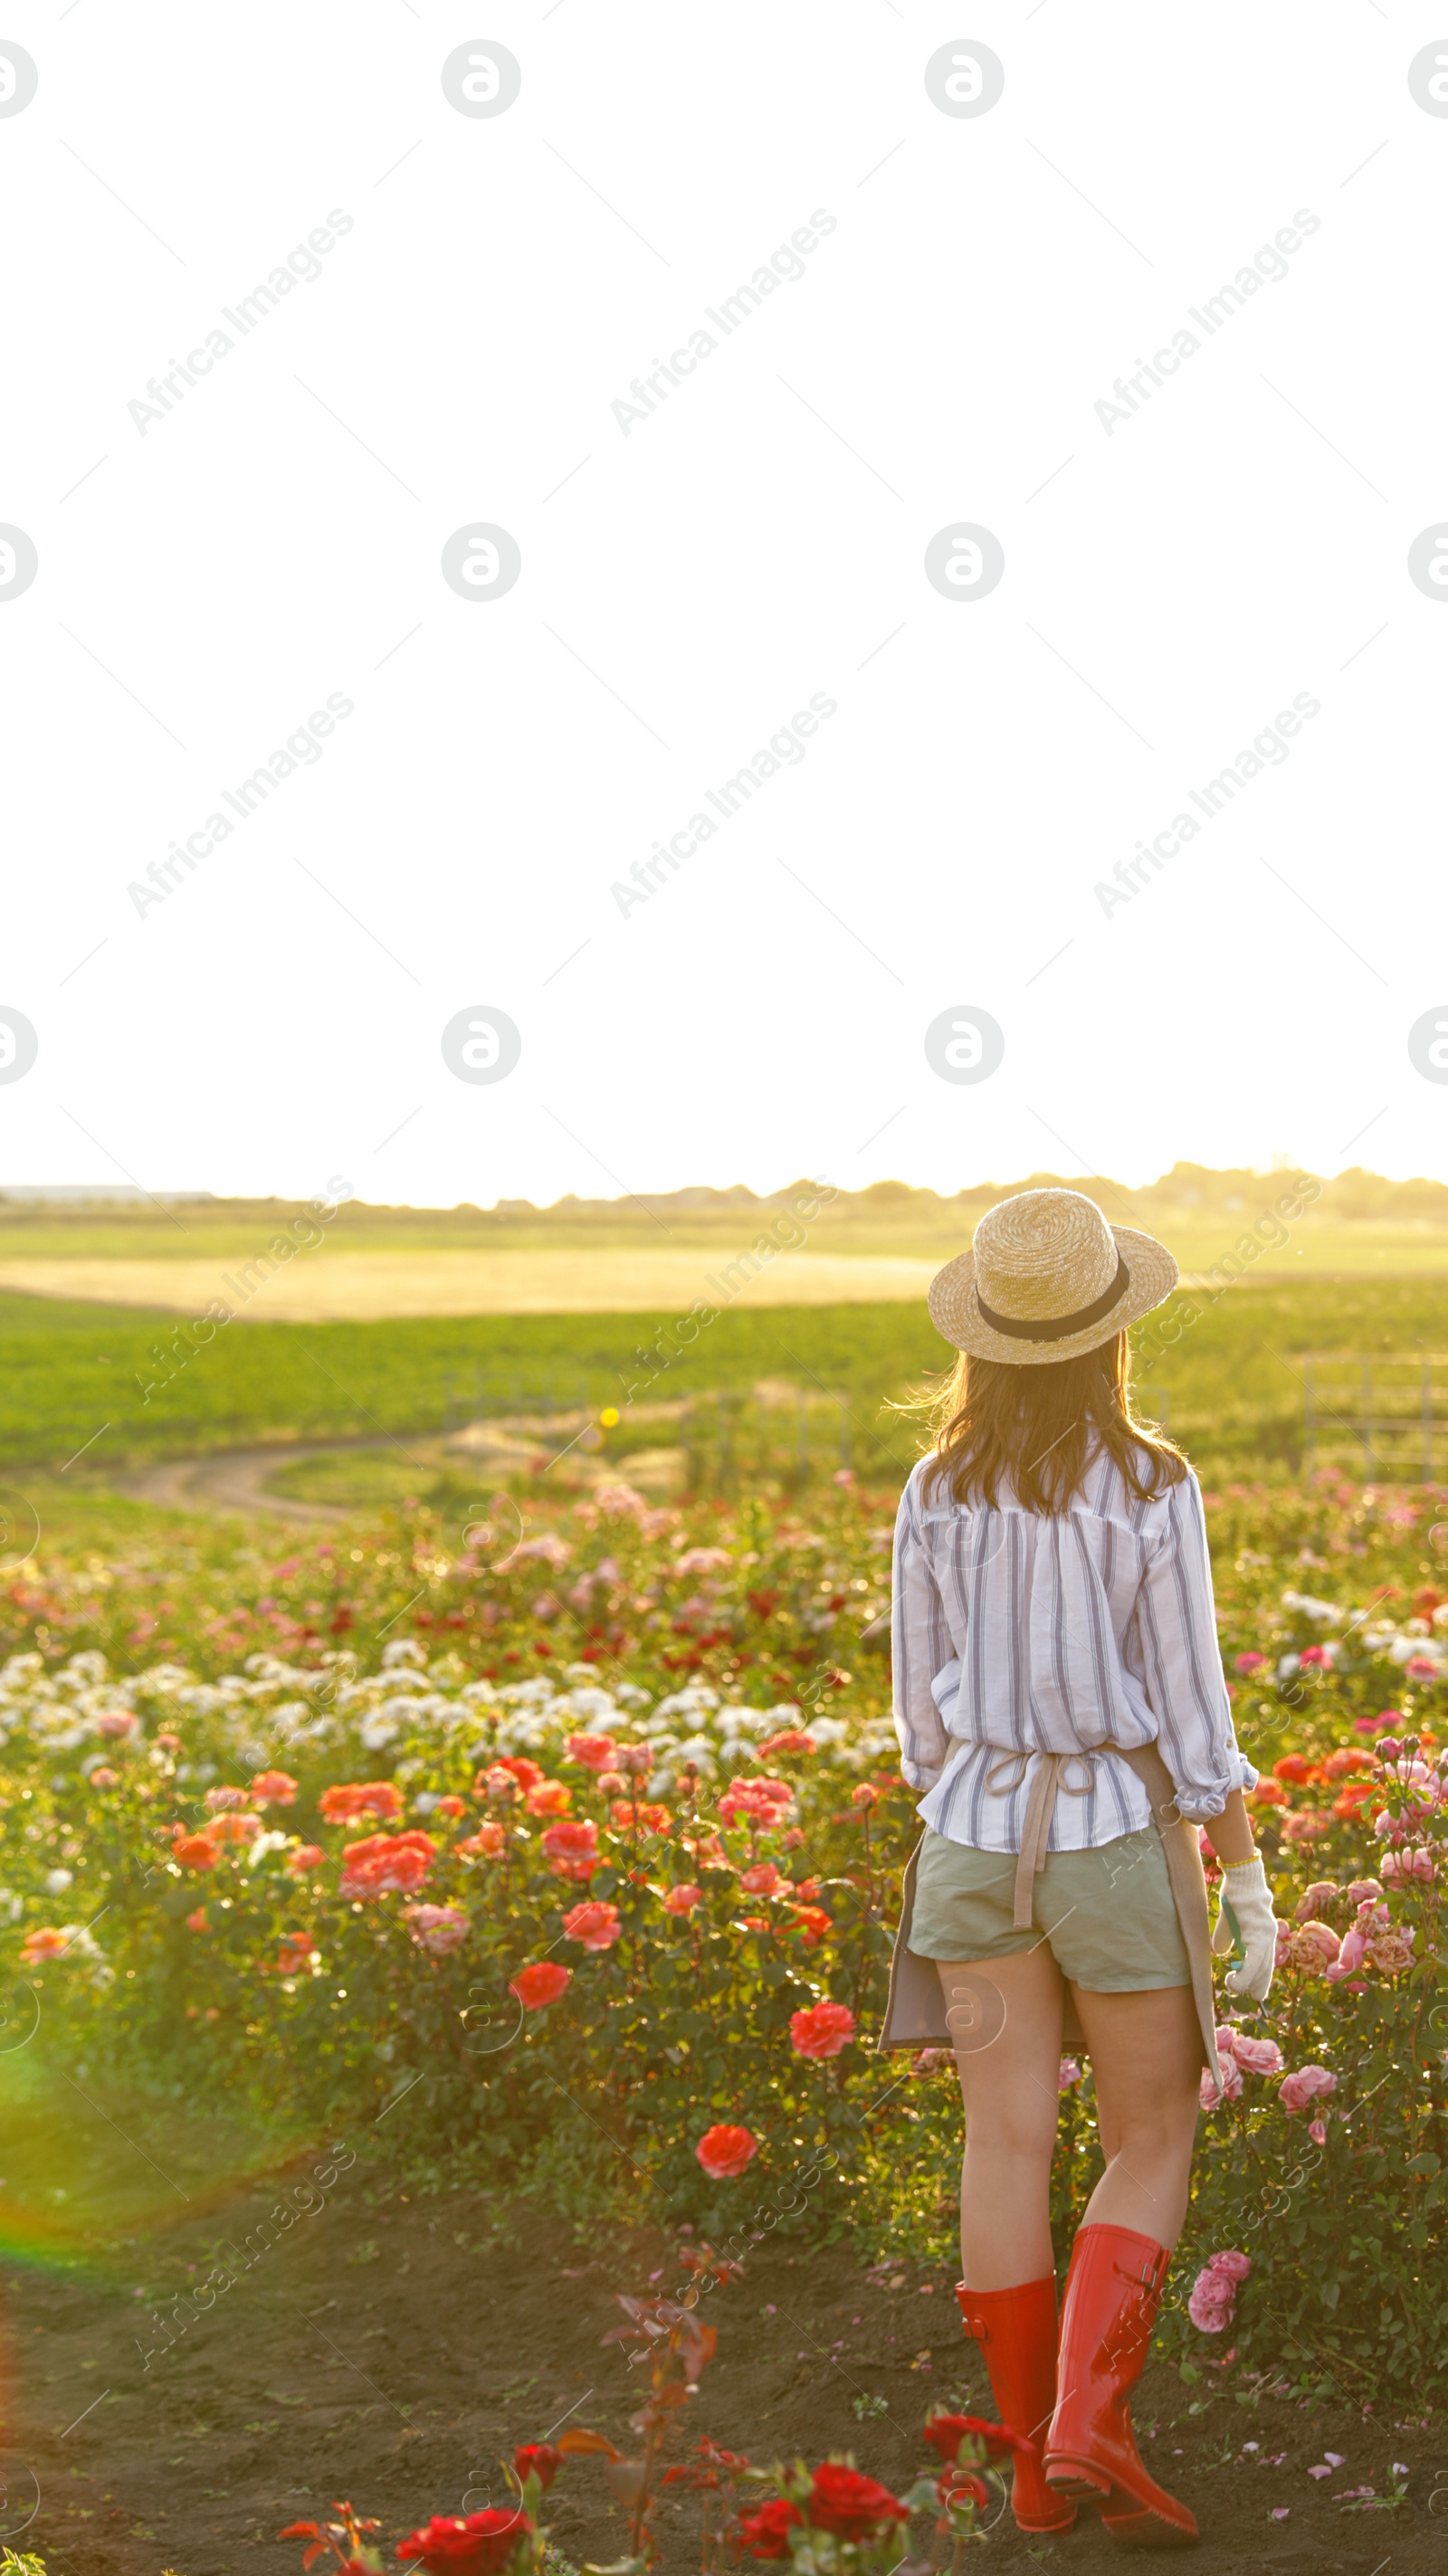 Photo of Woman near rose bushes in garden on sunny day